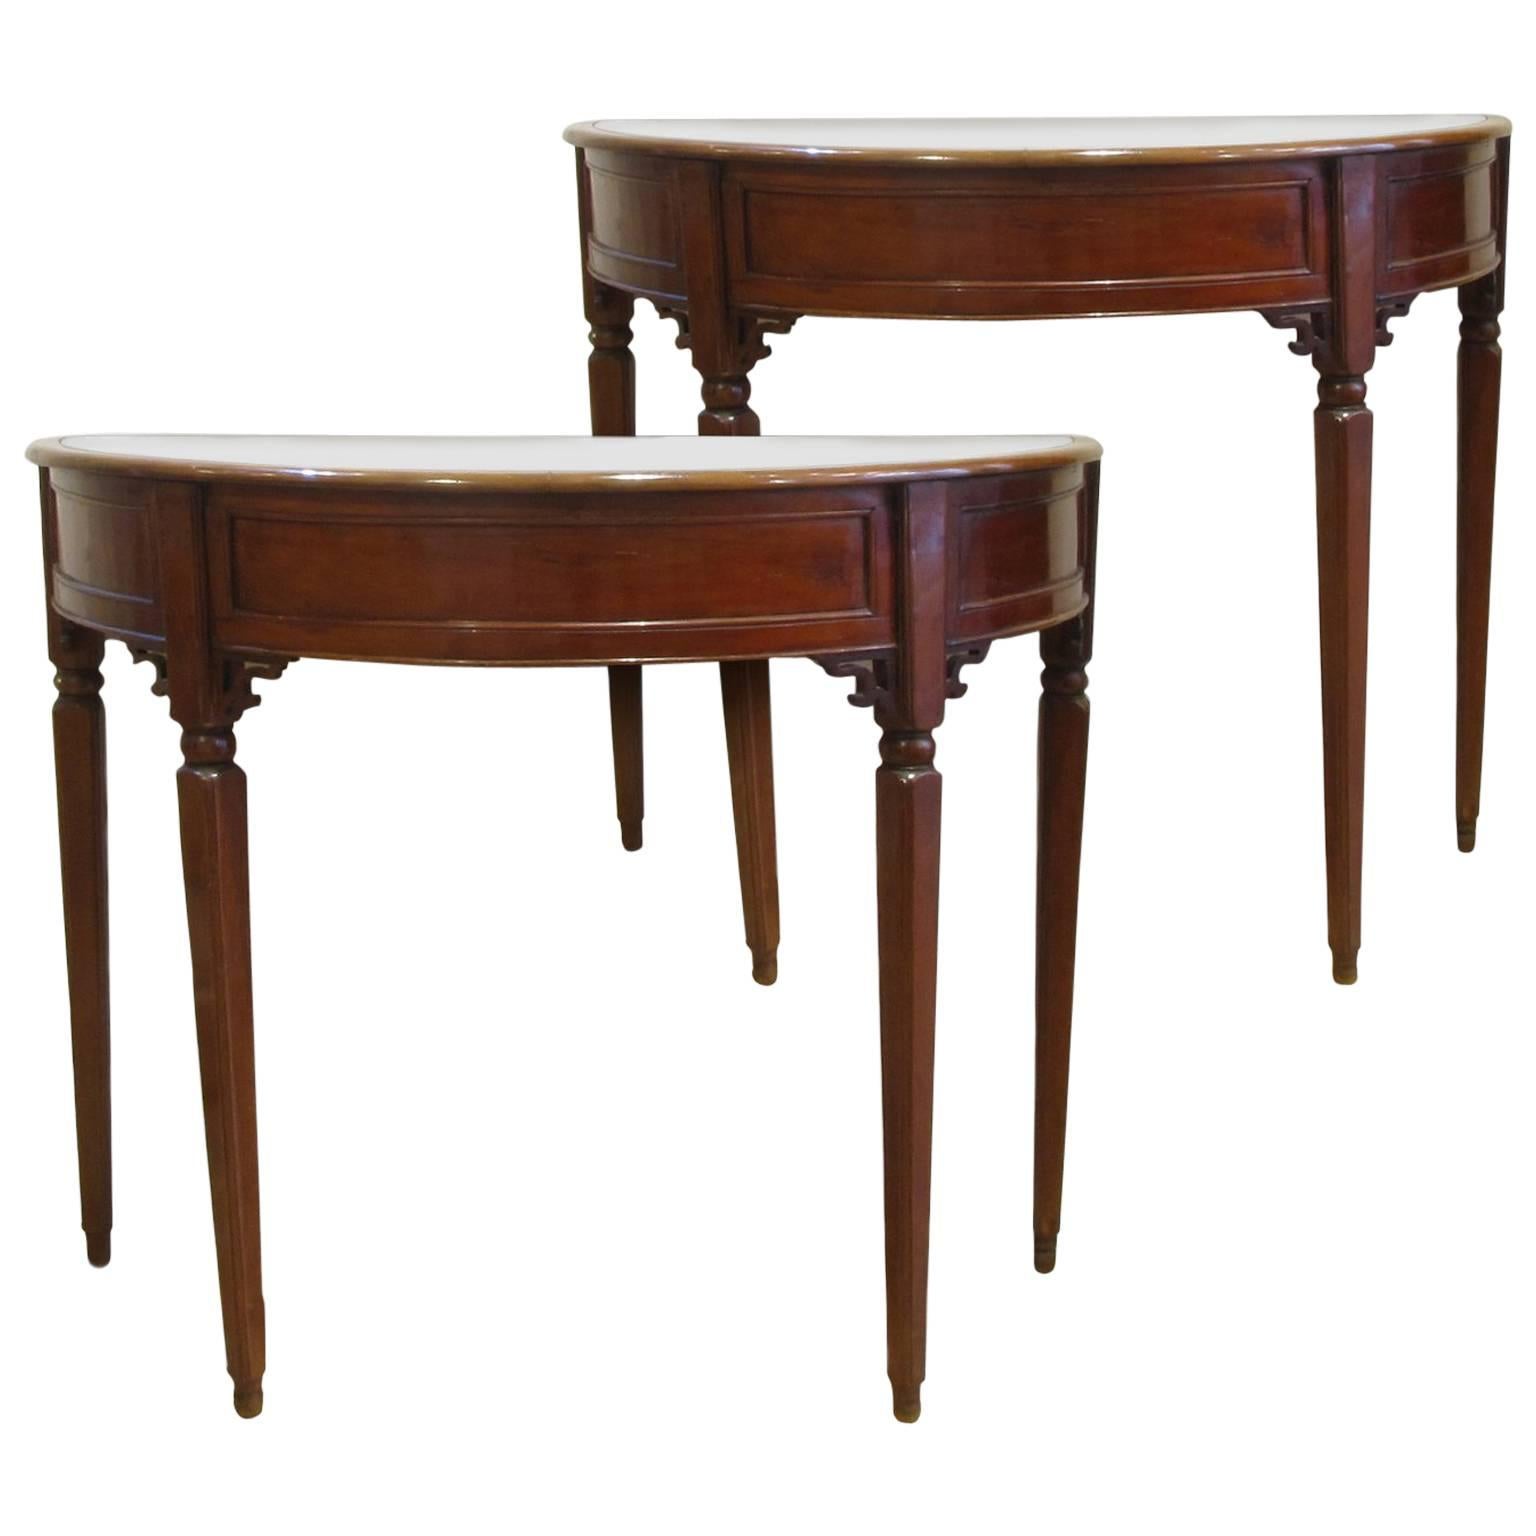 Two Italian Mid-19th Century Side Tables in Mahogany Wood with White Marble Top For Sale